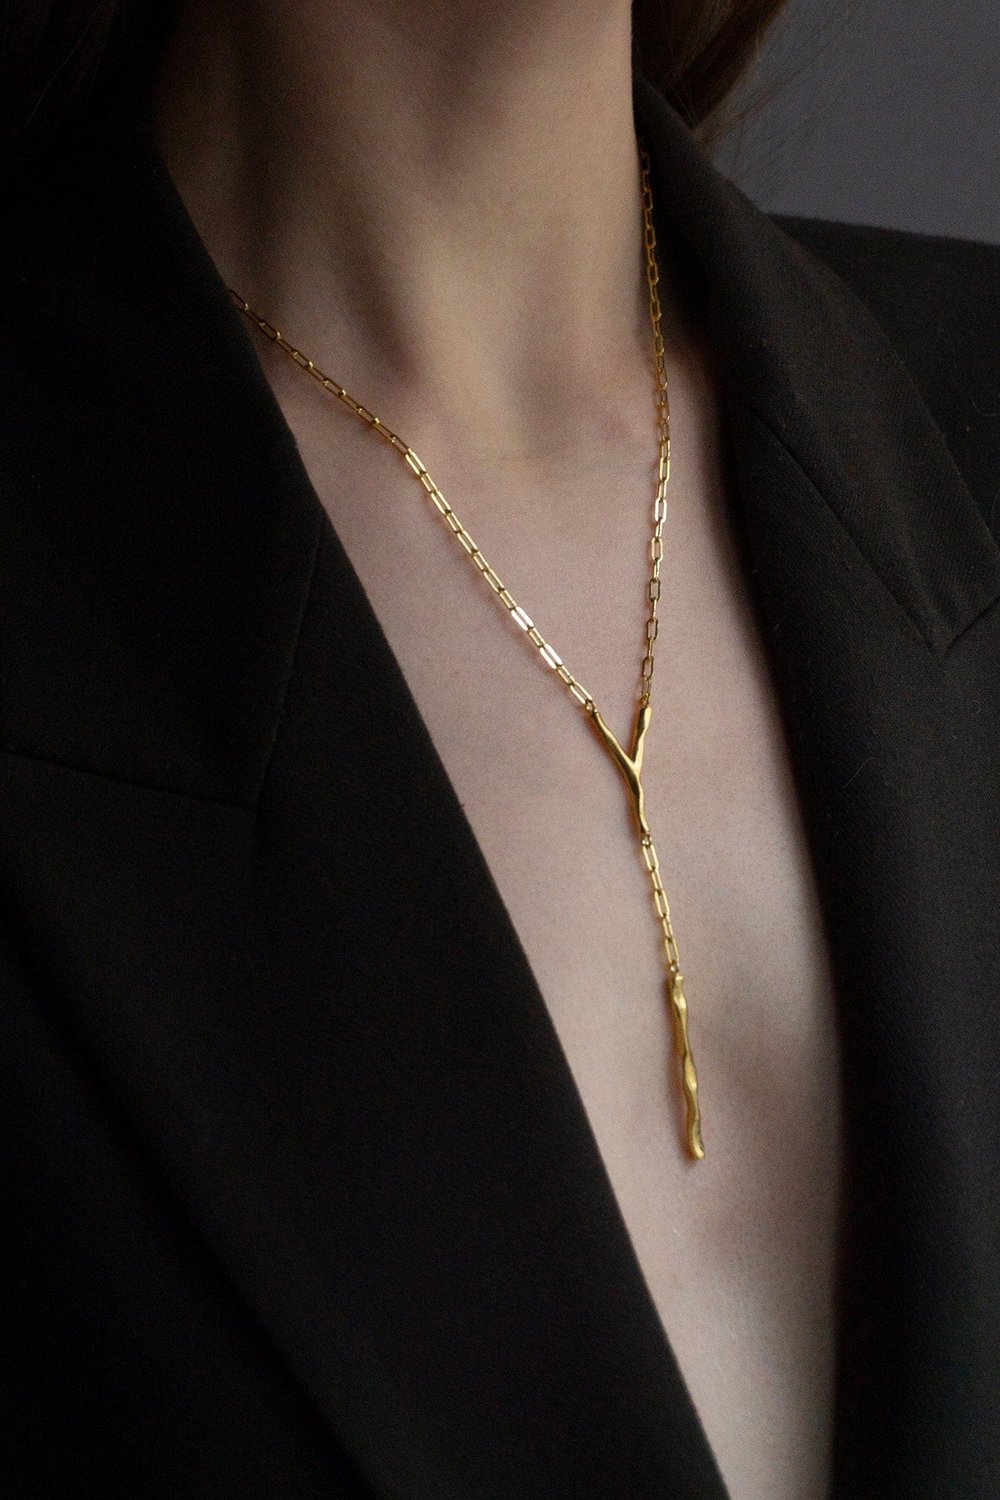 gilt-paperclip-necklace-gold-plated-ar-m-anna-rosa-moschouti-52424695251288.jpg